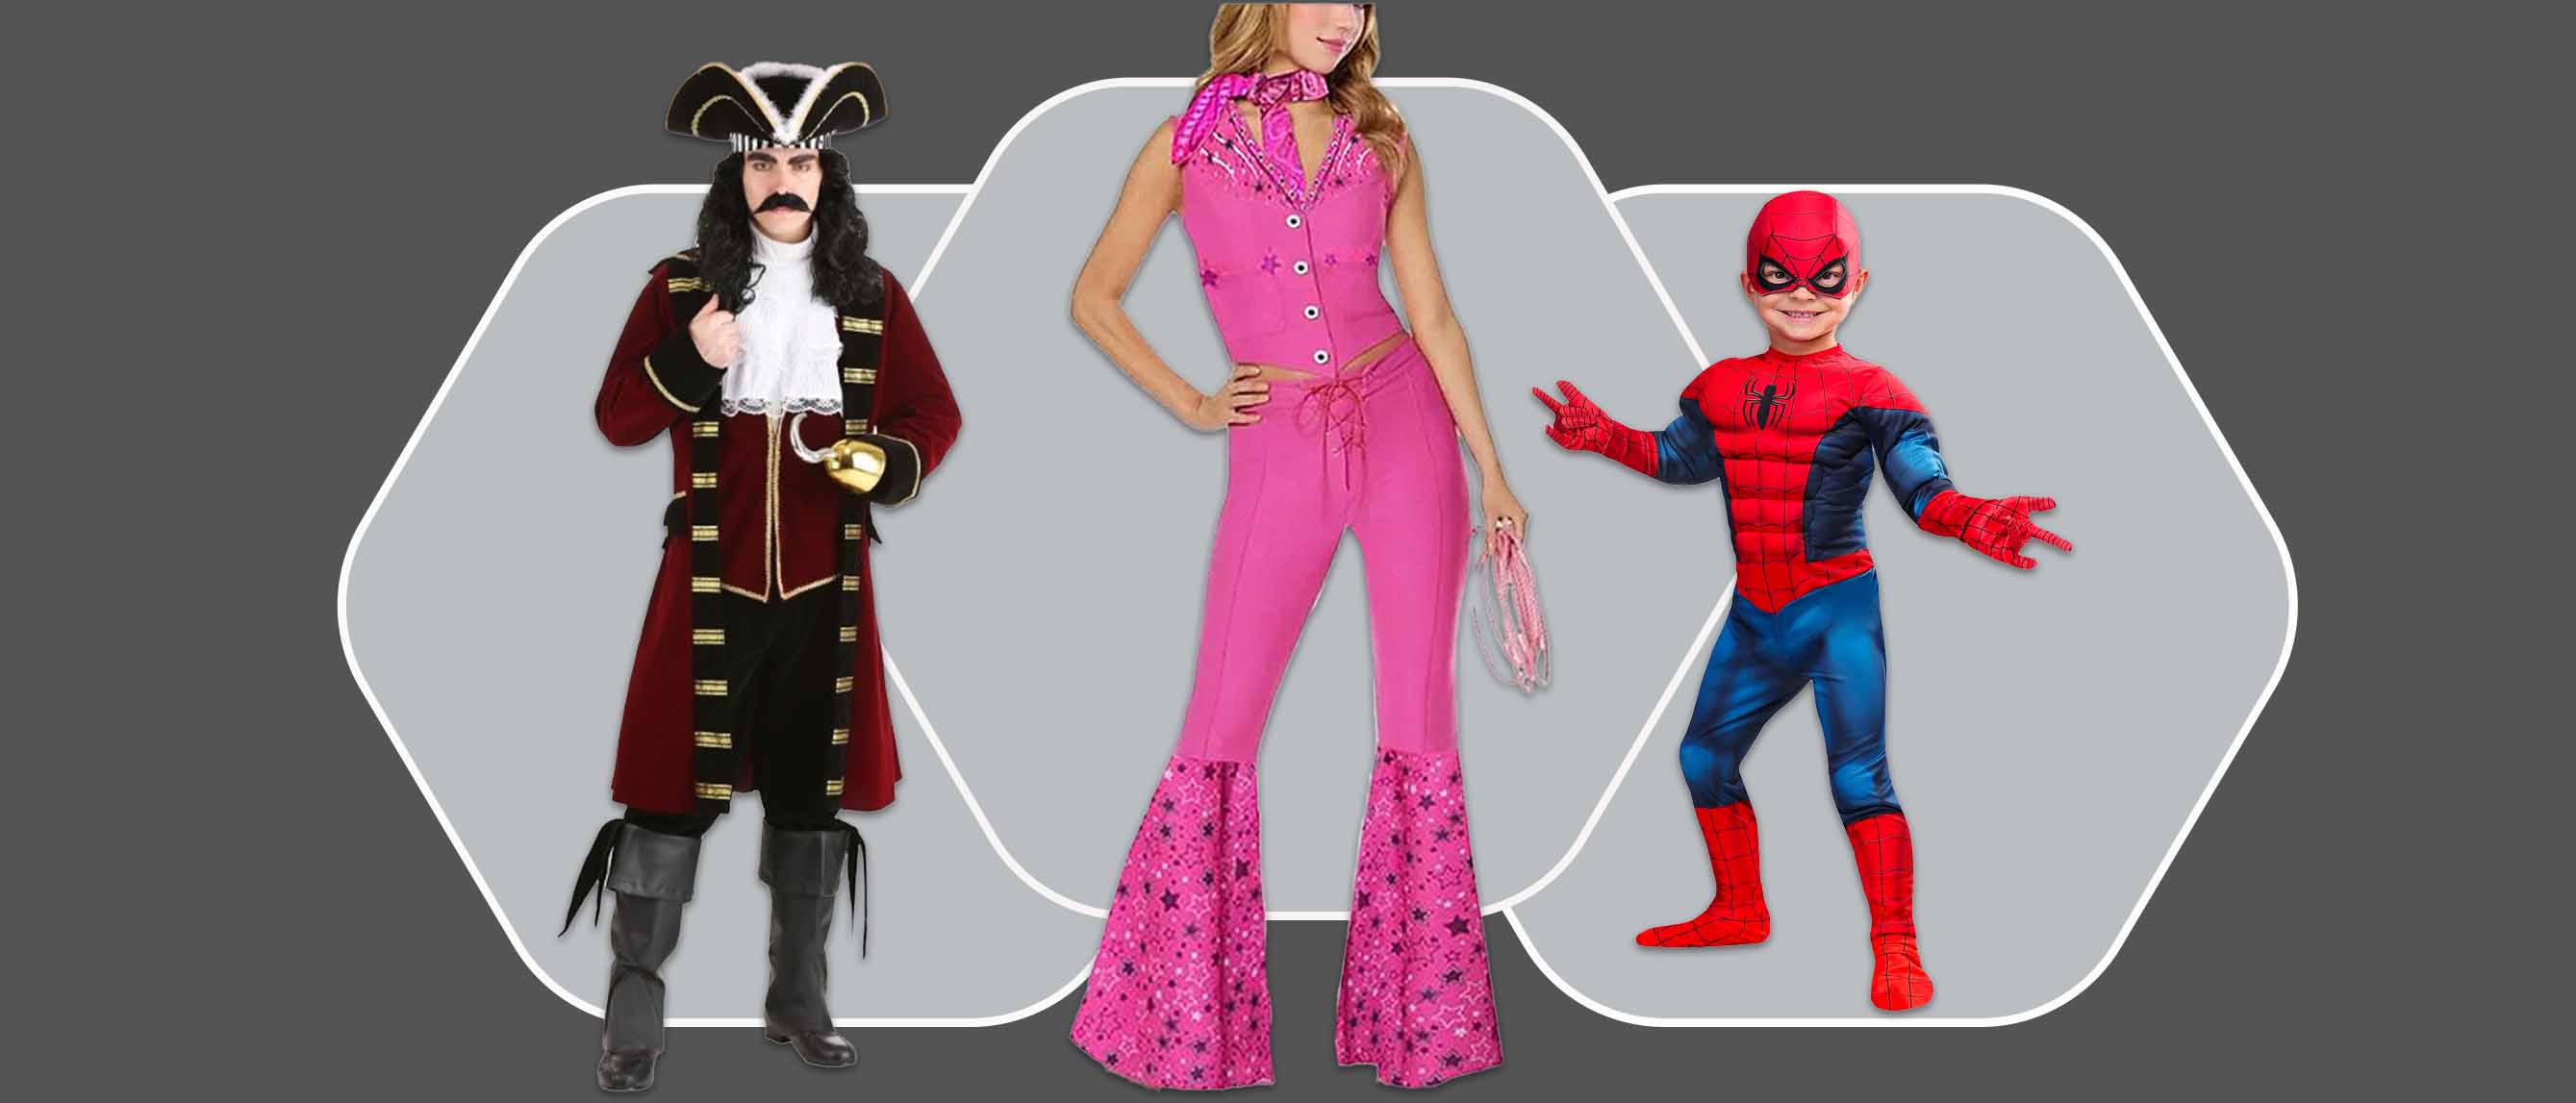 Shop Pop Culture Halloween Costumes Ideas For Kids in 2023